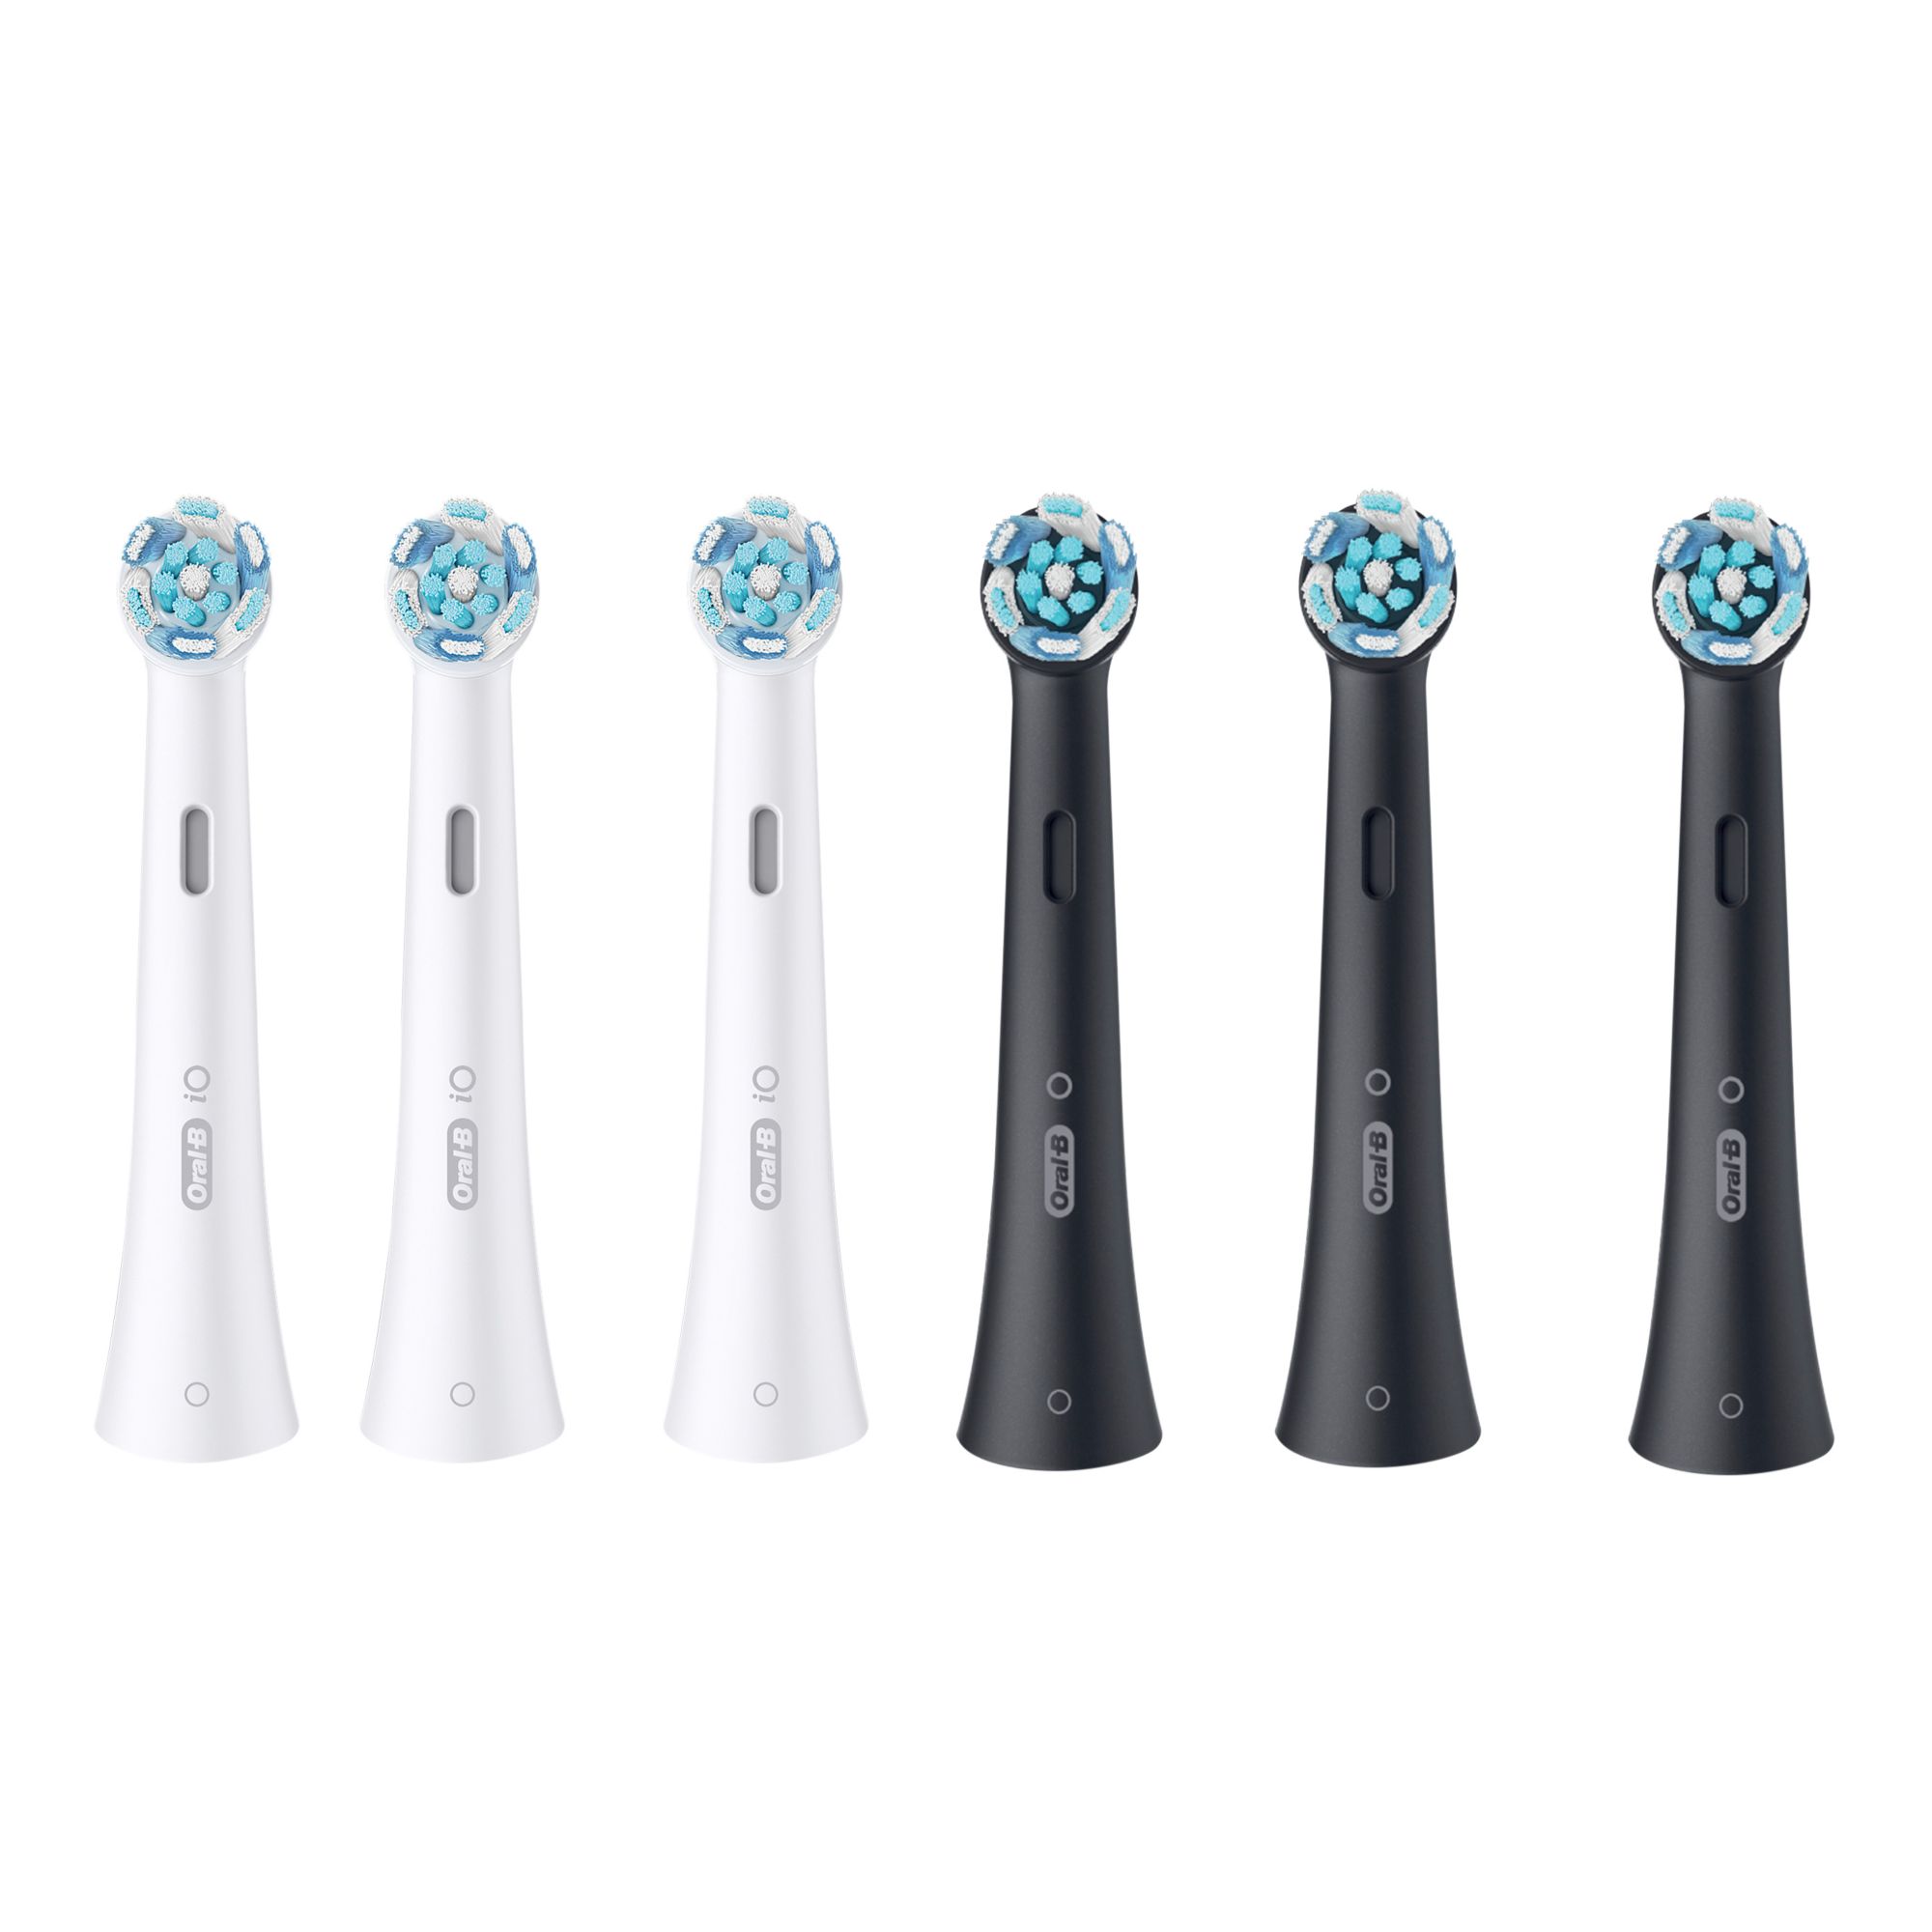  Oral-B iO Series 6 Electric Toothbrush with (1) Brush Head,  Black Lava : Health & Household